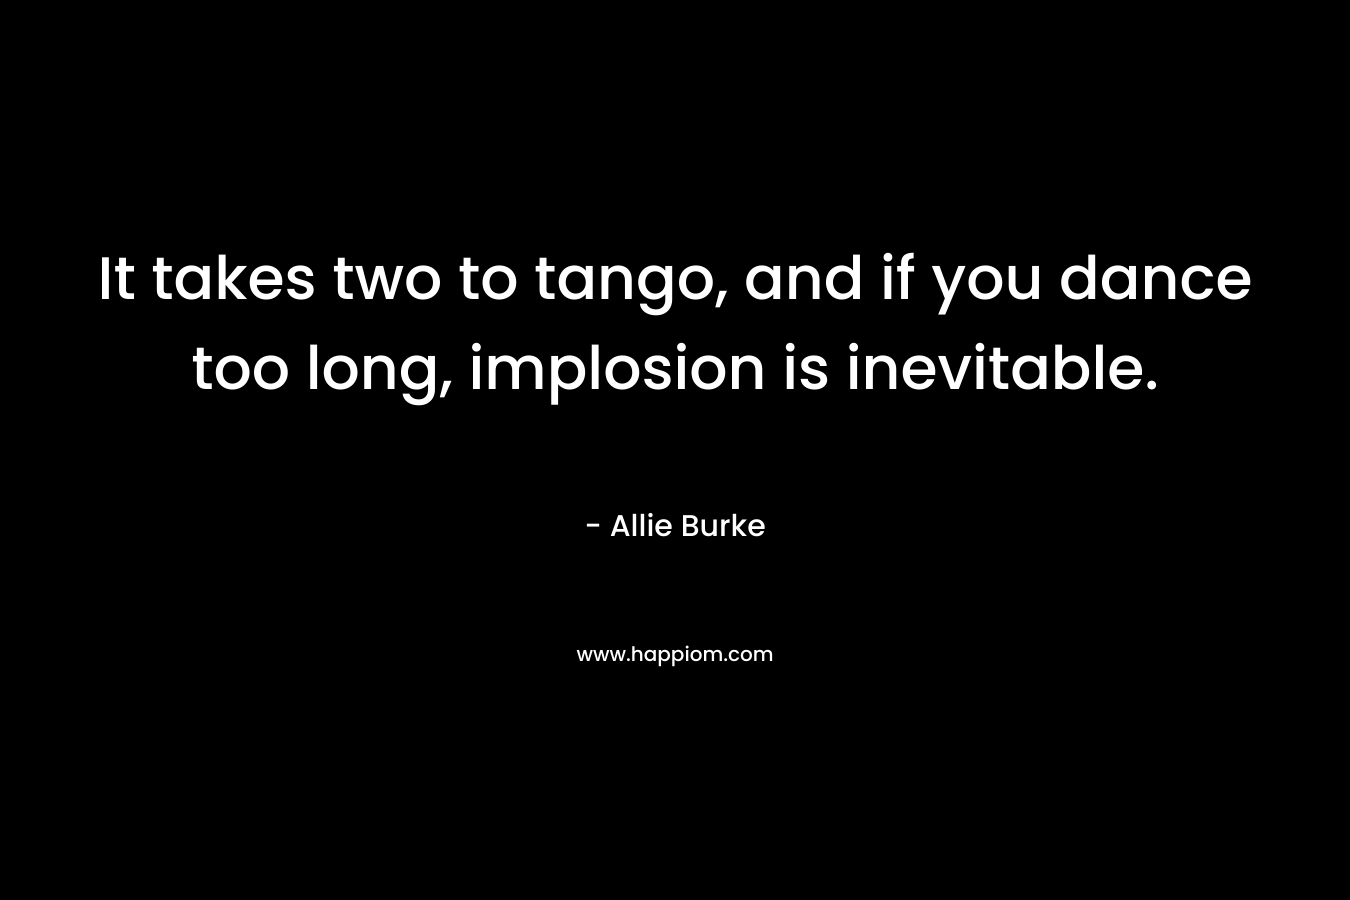 It takes two to tango, and if you dance too long, implosion is inevitable. – Allie Burke